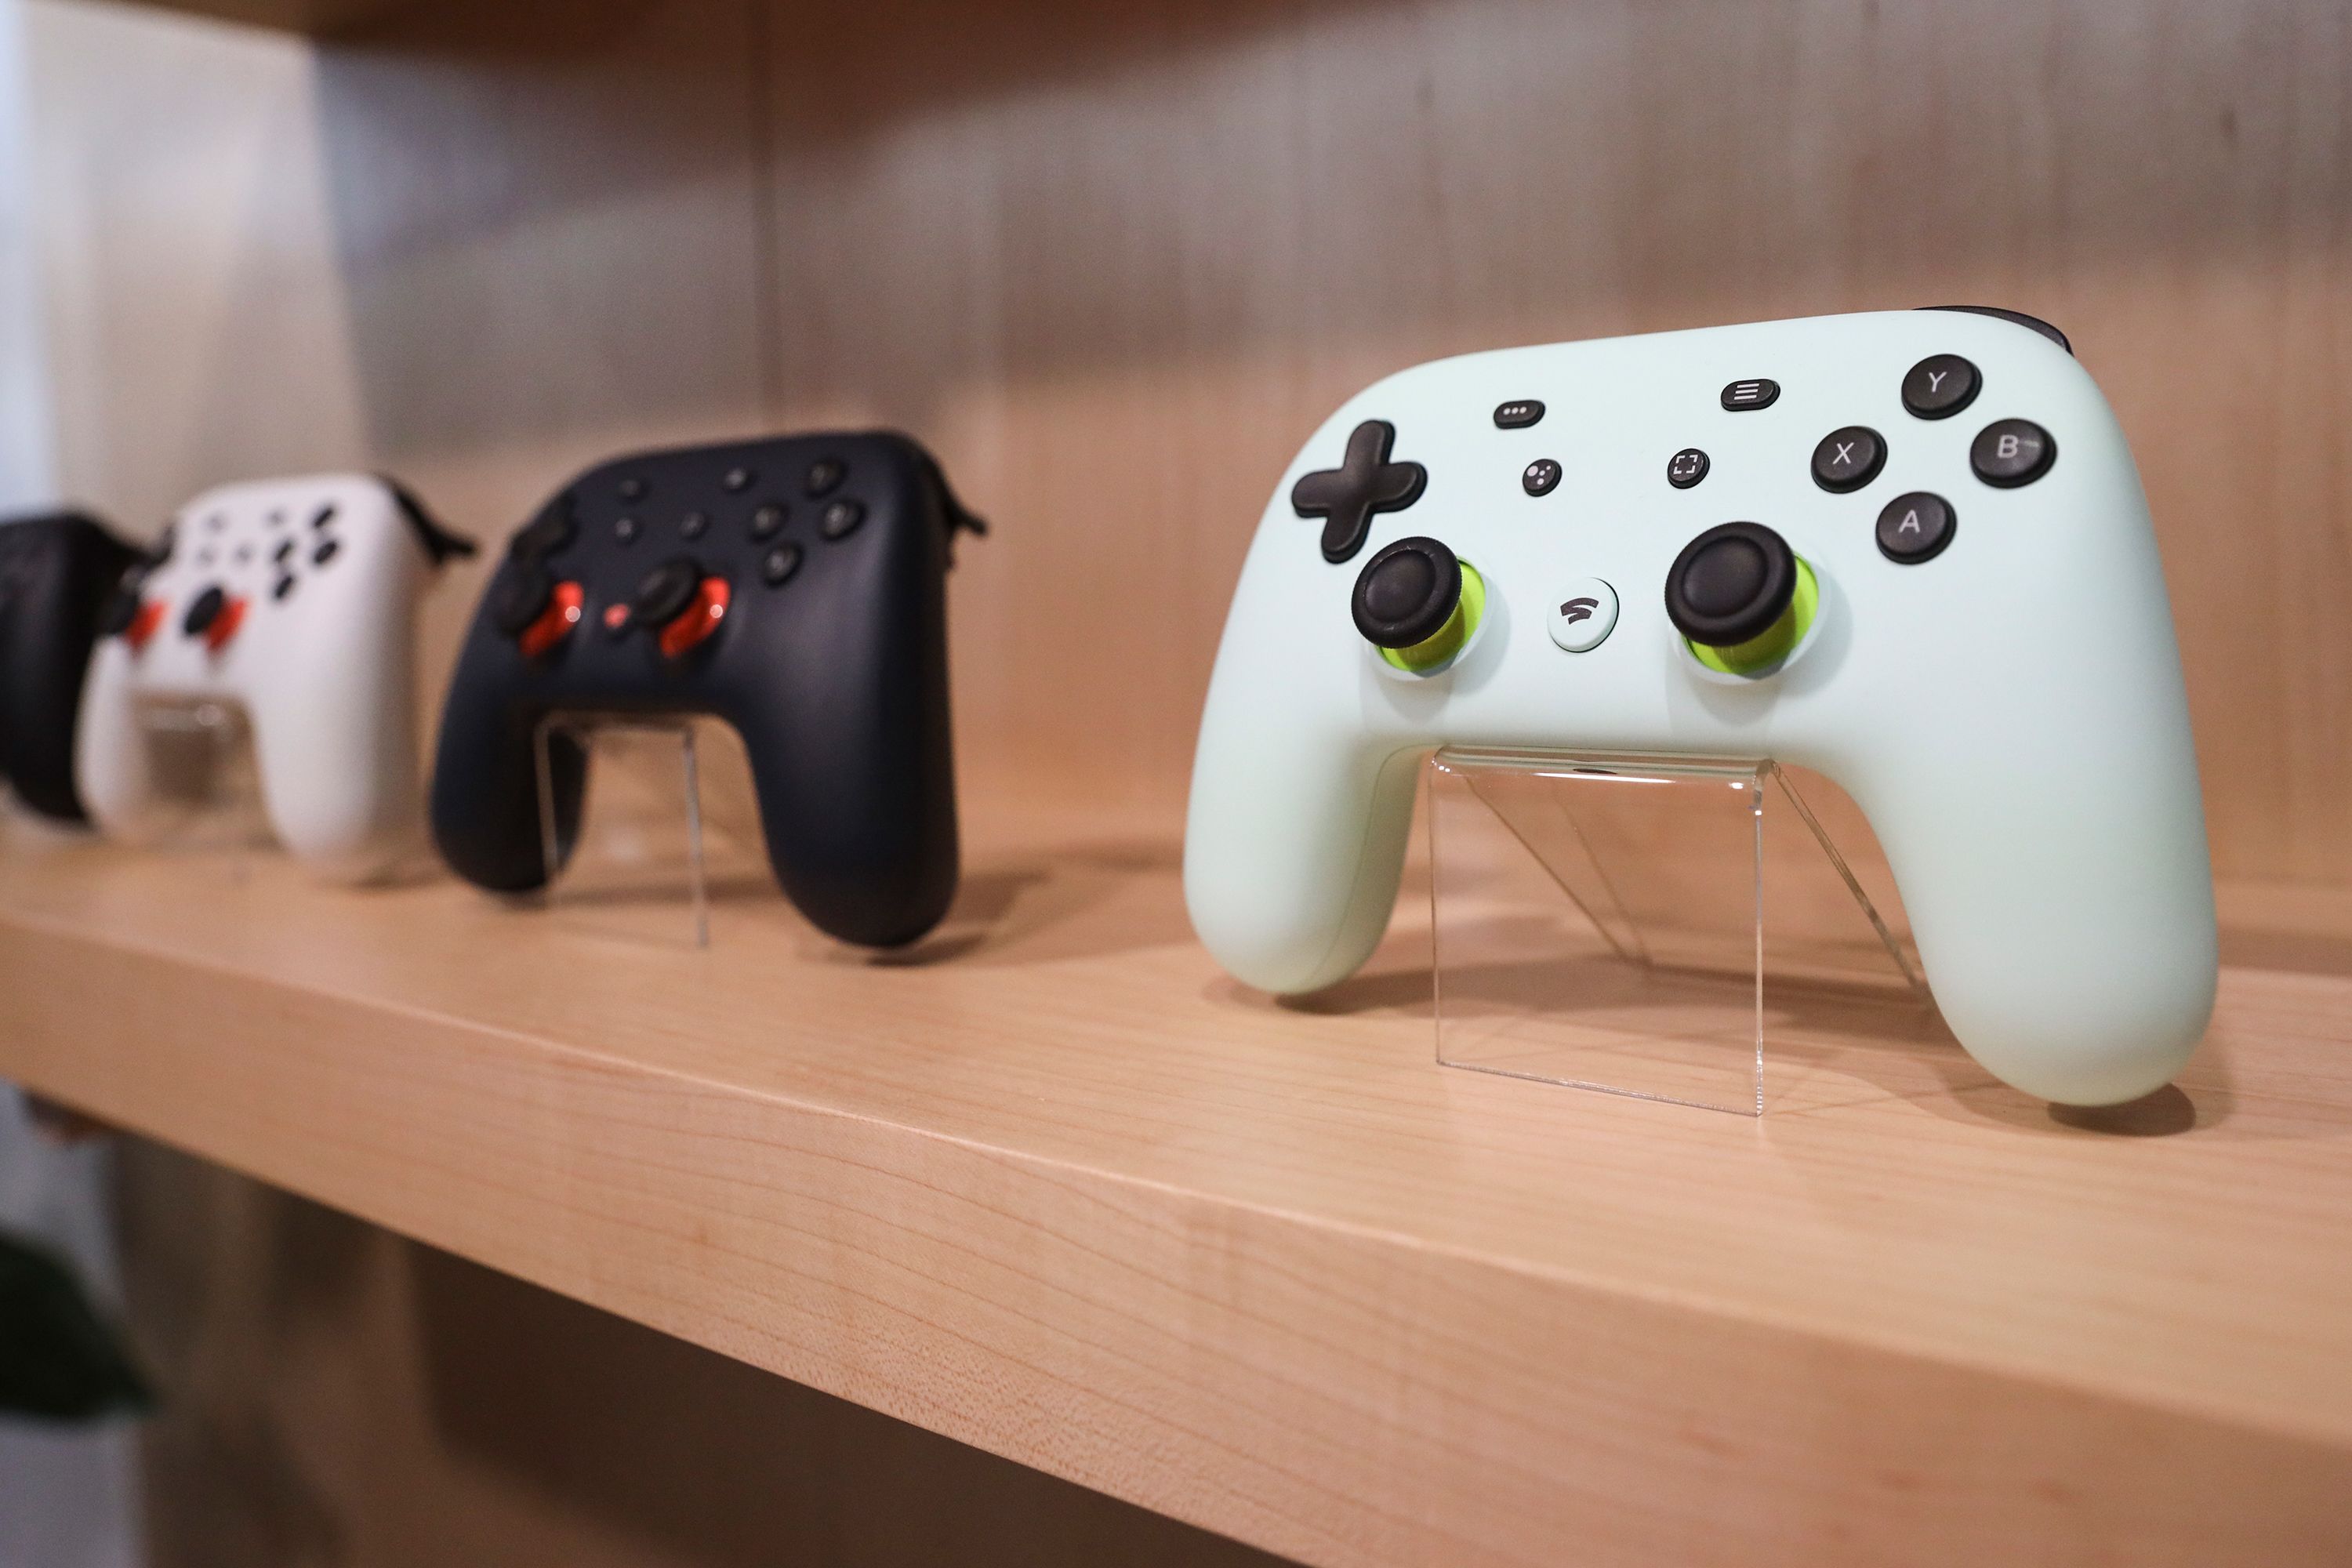 Søgemaskine markedsføring Cyclops Loaded Google is targeting women gamers with Stadia launch | CNN Business